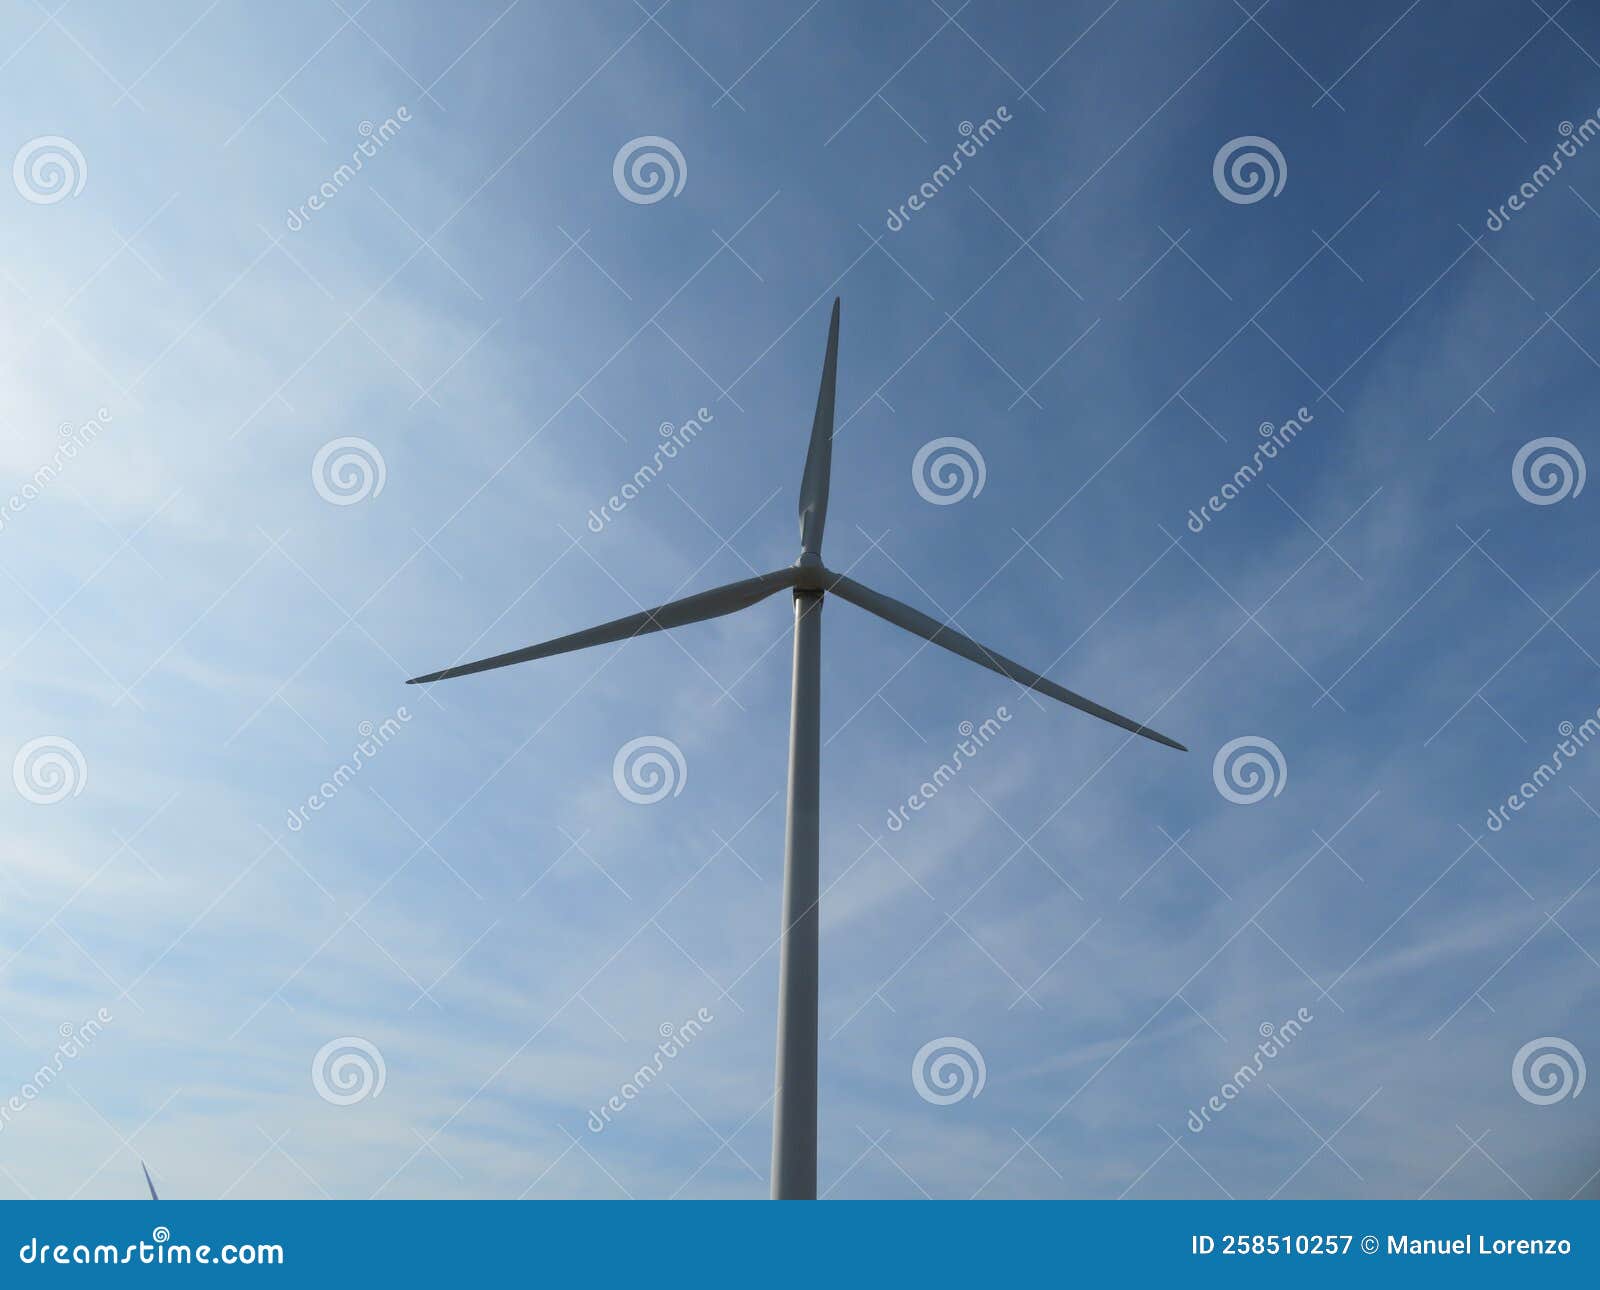 wind turbine clean energy air large blades mill height electricity